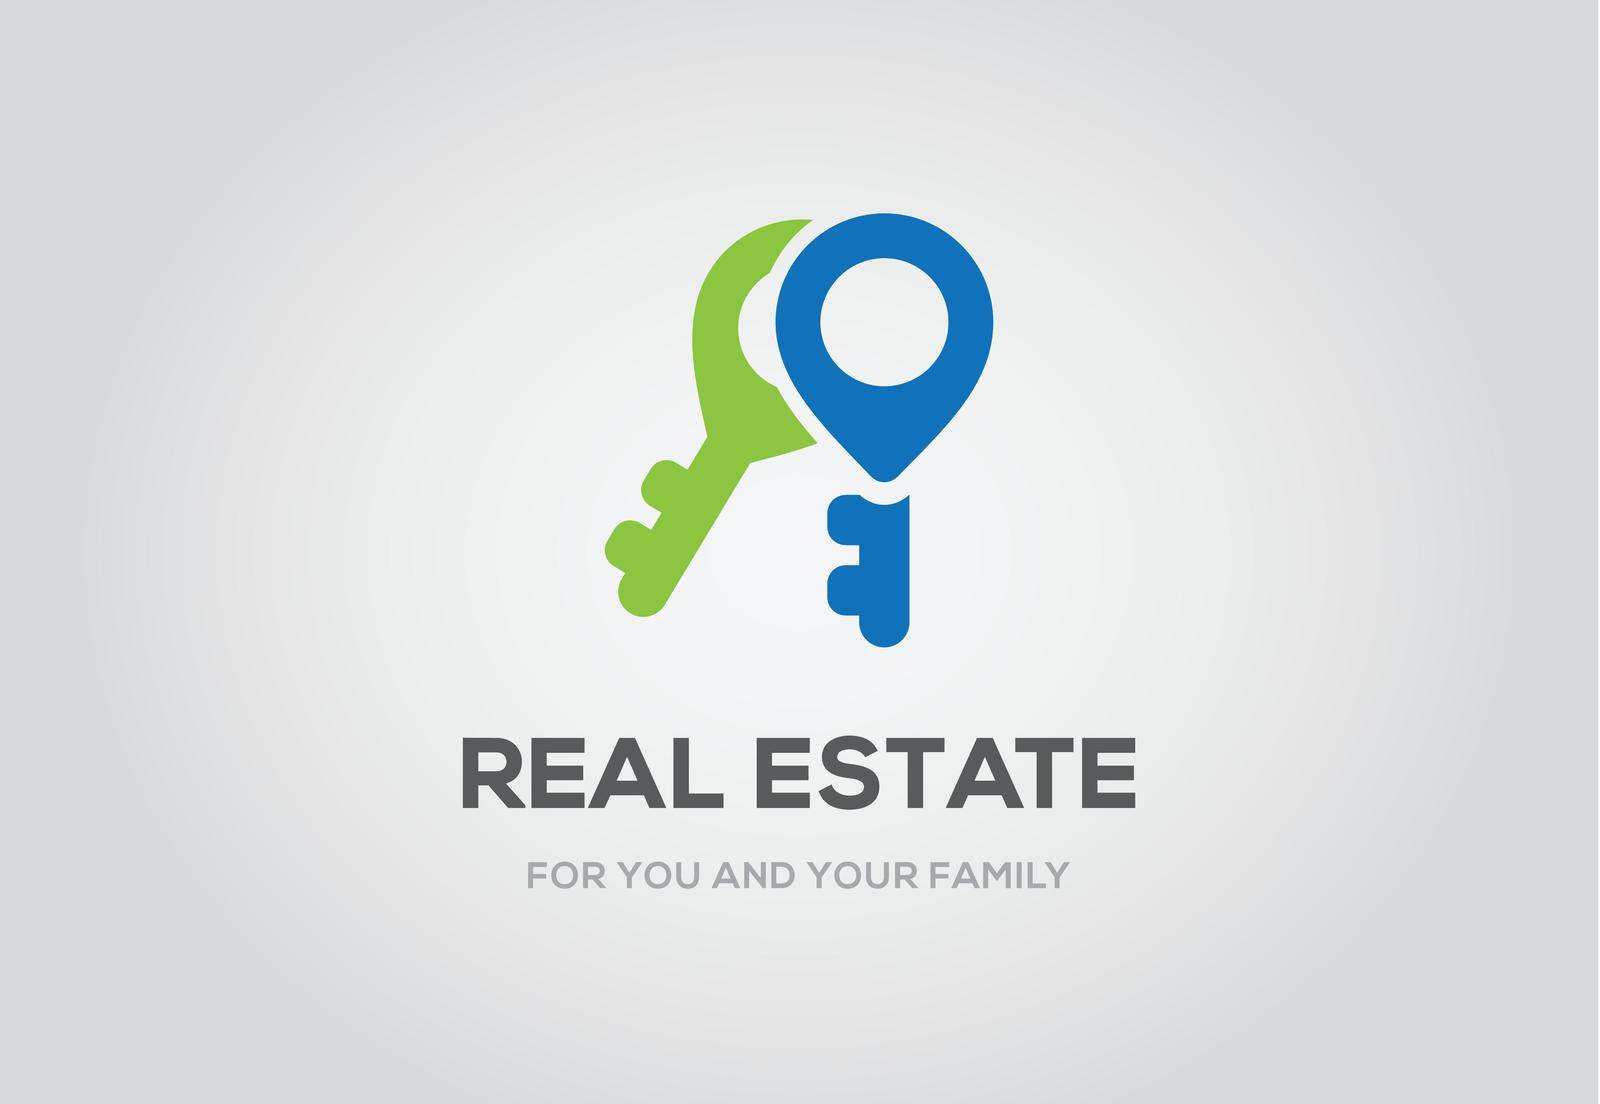 Template logo for real estate agency or cottage town elite class. Real estate logo. by ckybes